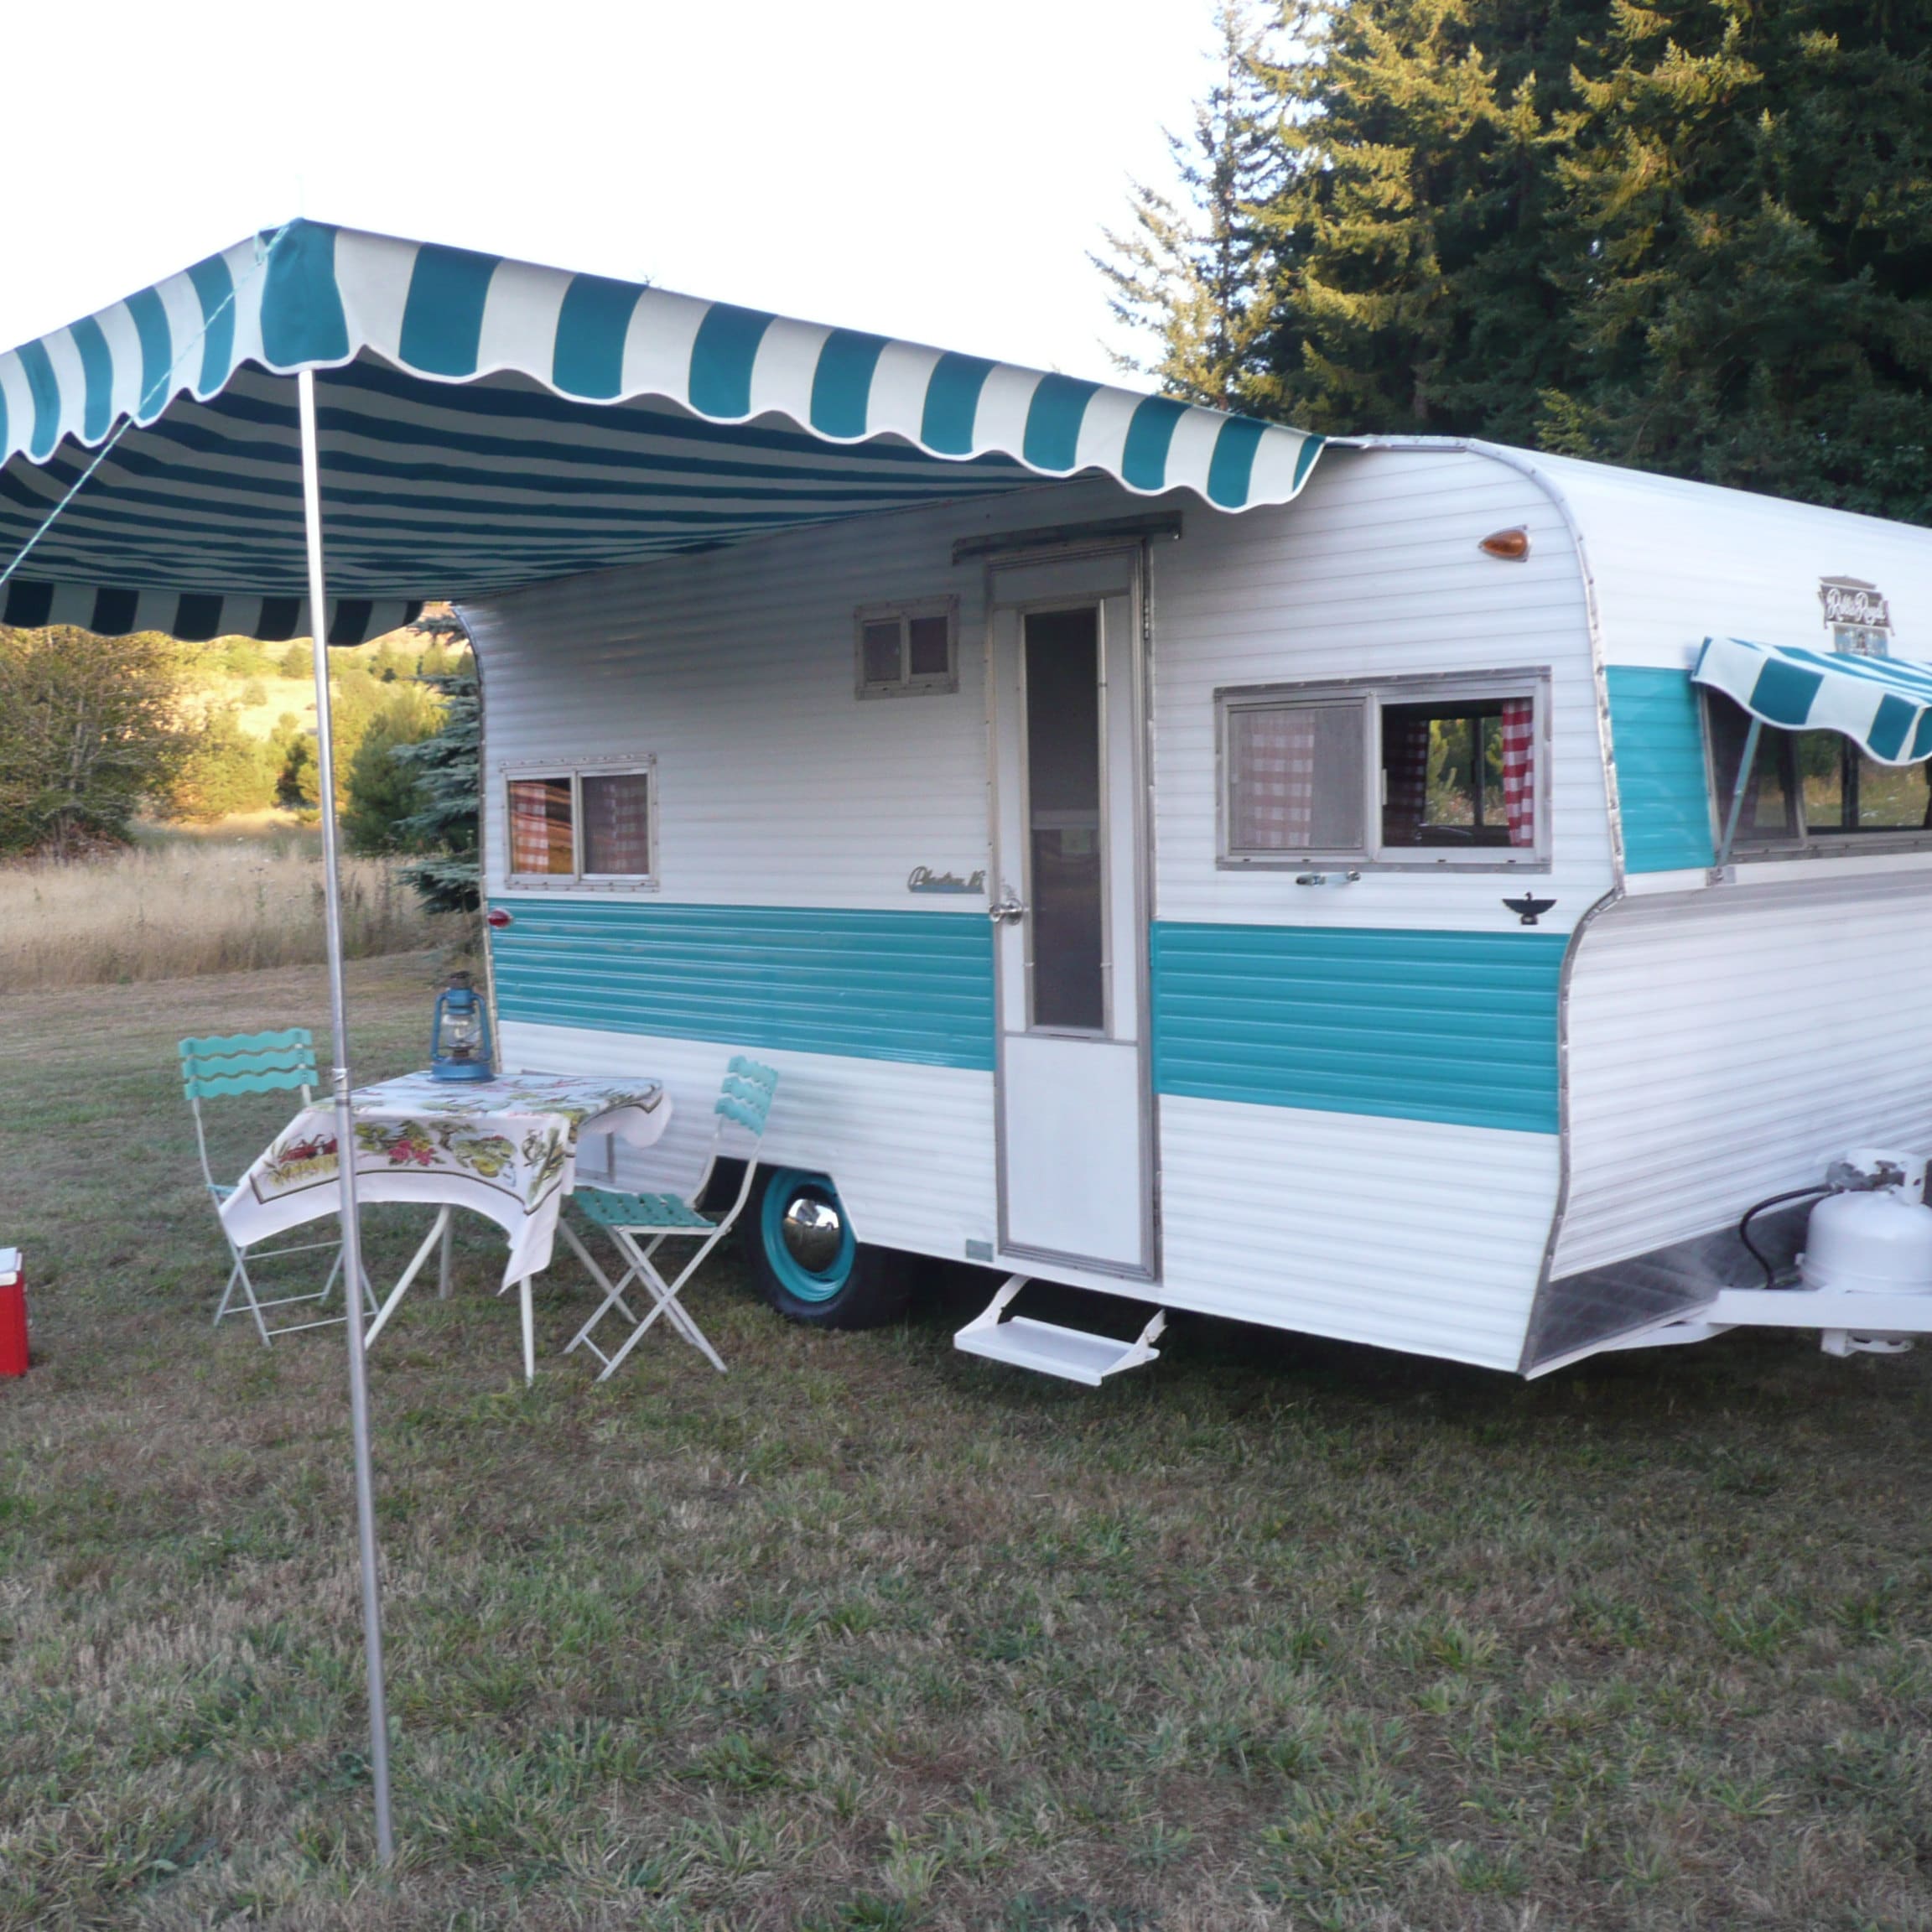 Vintage Travel Trailer Decor and Accessories by